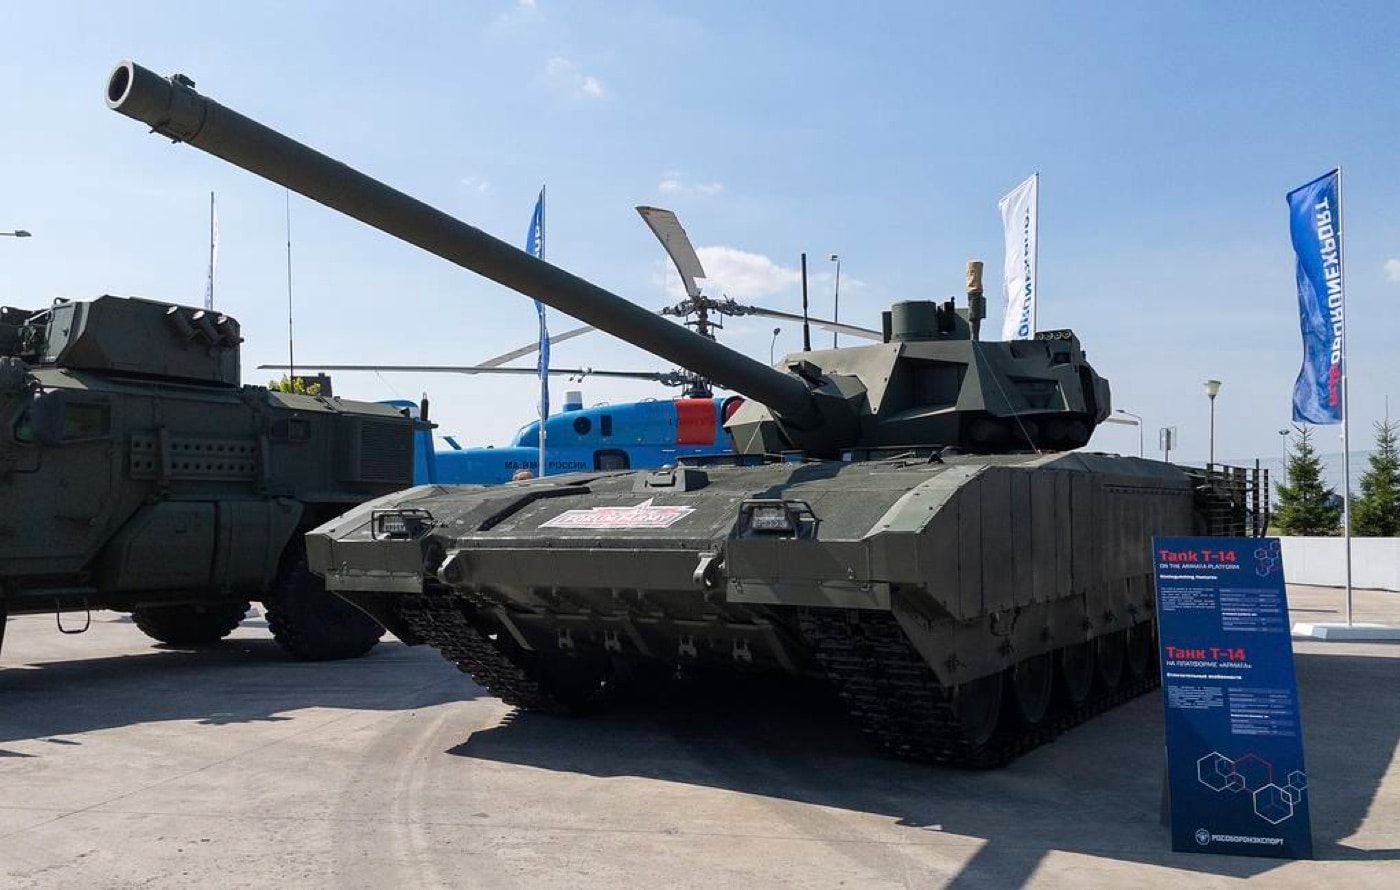 In this photo, we see the T-14 Armata had been eagerly anticipated on display during a exhibition. More than 2,000 tanks were supposed to be delivered by 2025. However, few have actually been manufactured. In the national interest, Russia moved production back to T-90 tanks and updating old T62 and T-72 tanks. Russia's new T-14 would be deployed to Ukraine if they had them in any sizeable quantity. It is a piece of equipment that would provide a huge boost — if only a morale one. Due to sanctions, many of the parts for the new tanks have dogged with delays the tank.